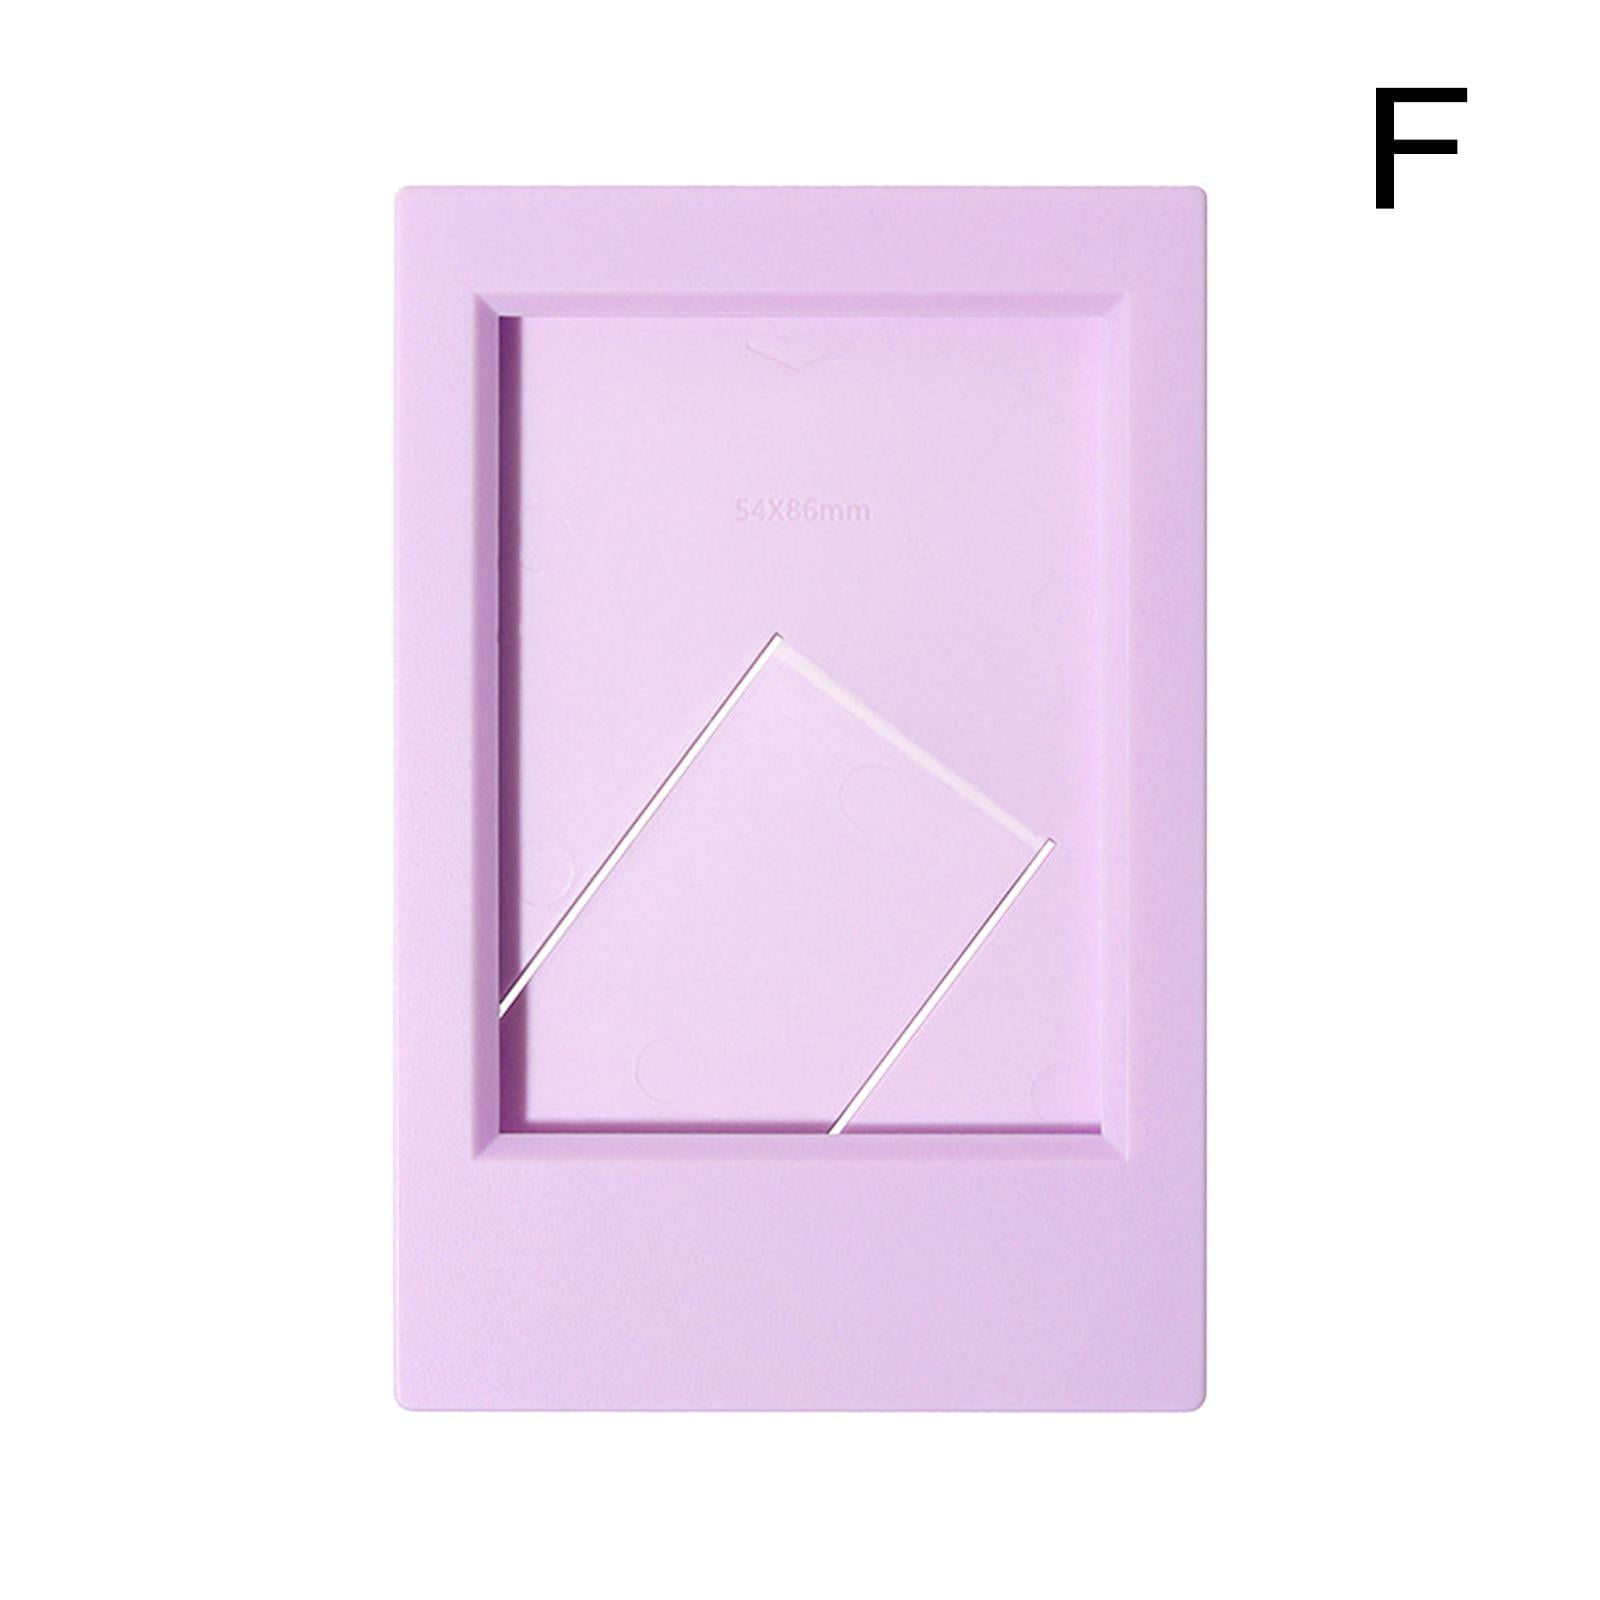 tiny small stand for picture frame｜TikTok Search